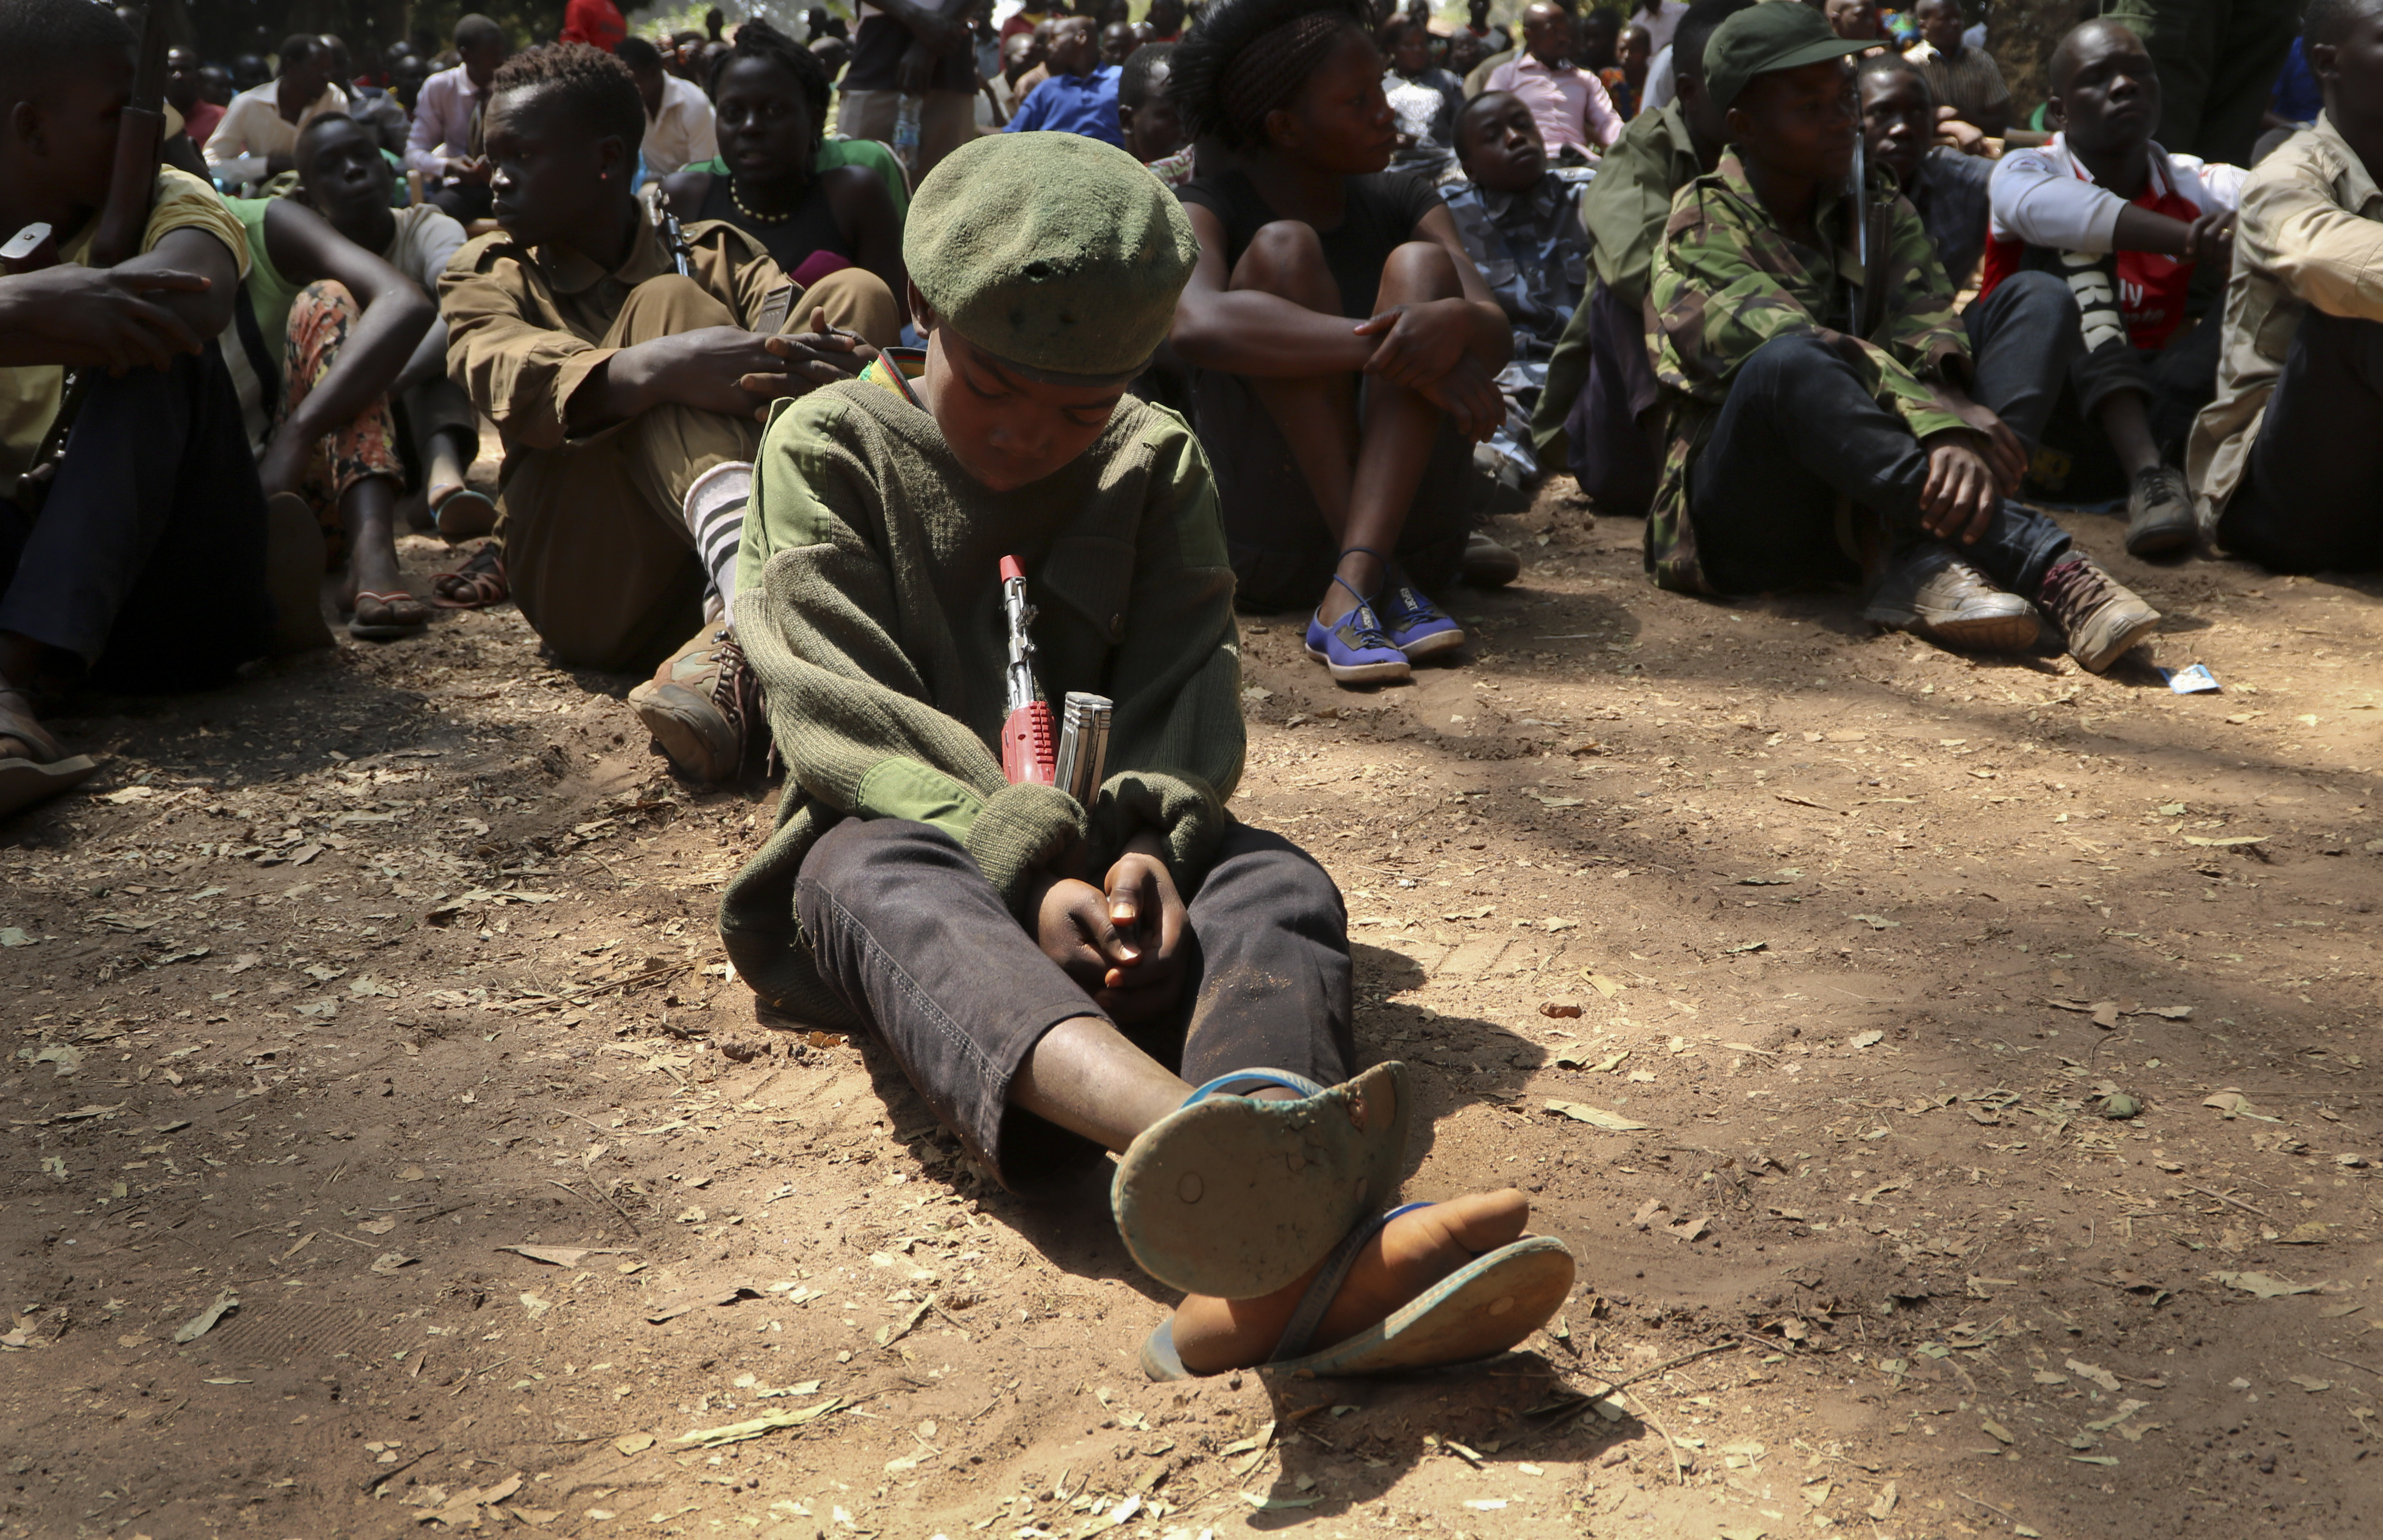 A young child soldier sits on the ground at a release ceremony, where he and others laid down their weapons and traded in their uniforms to return to 